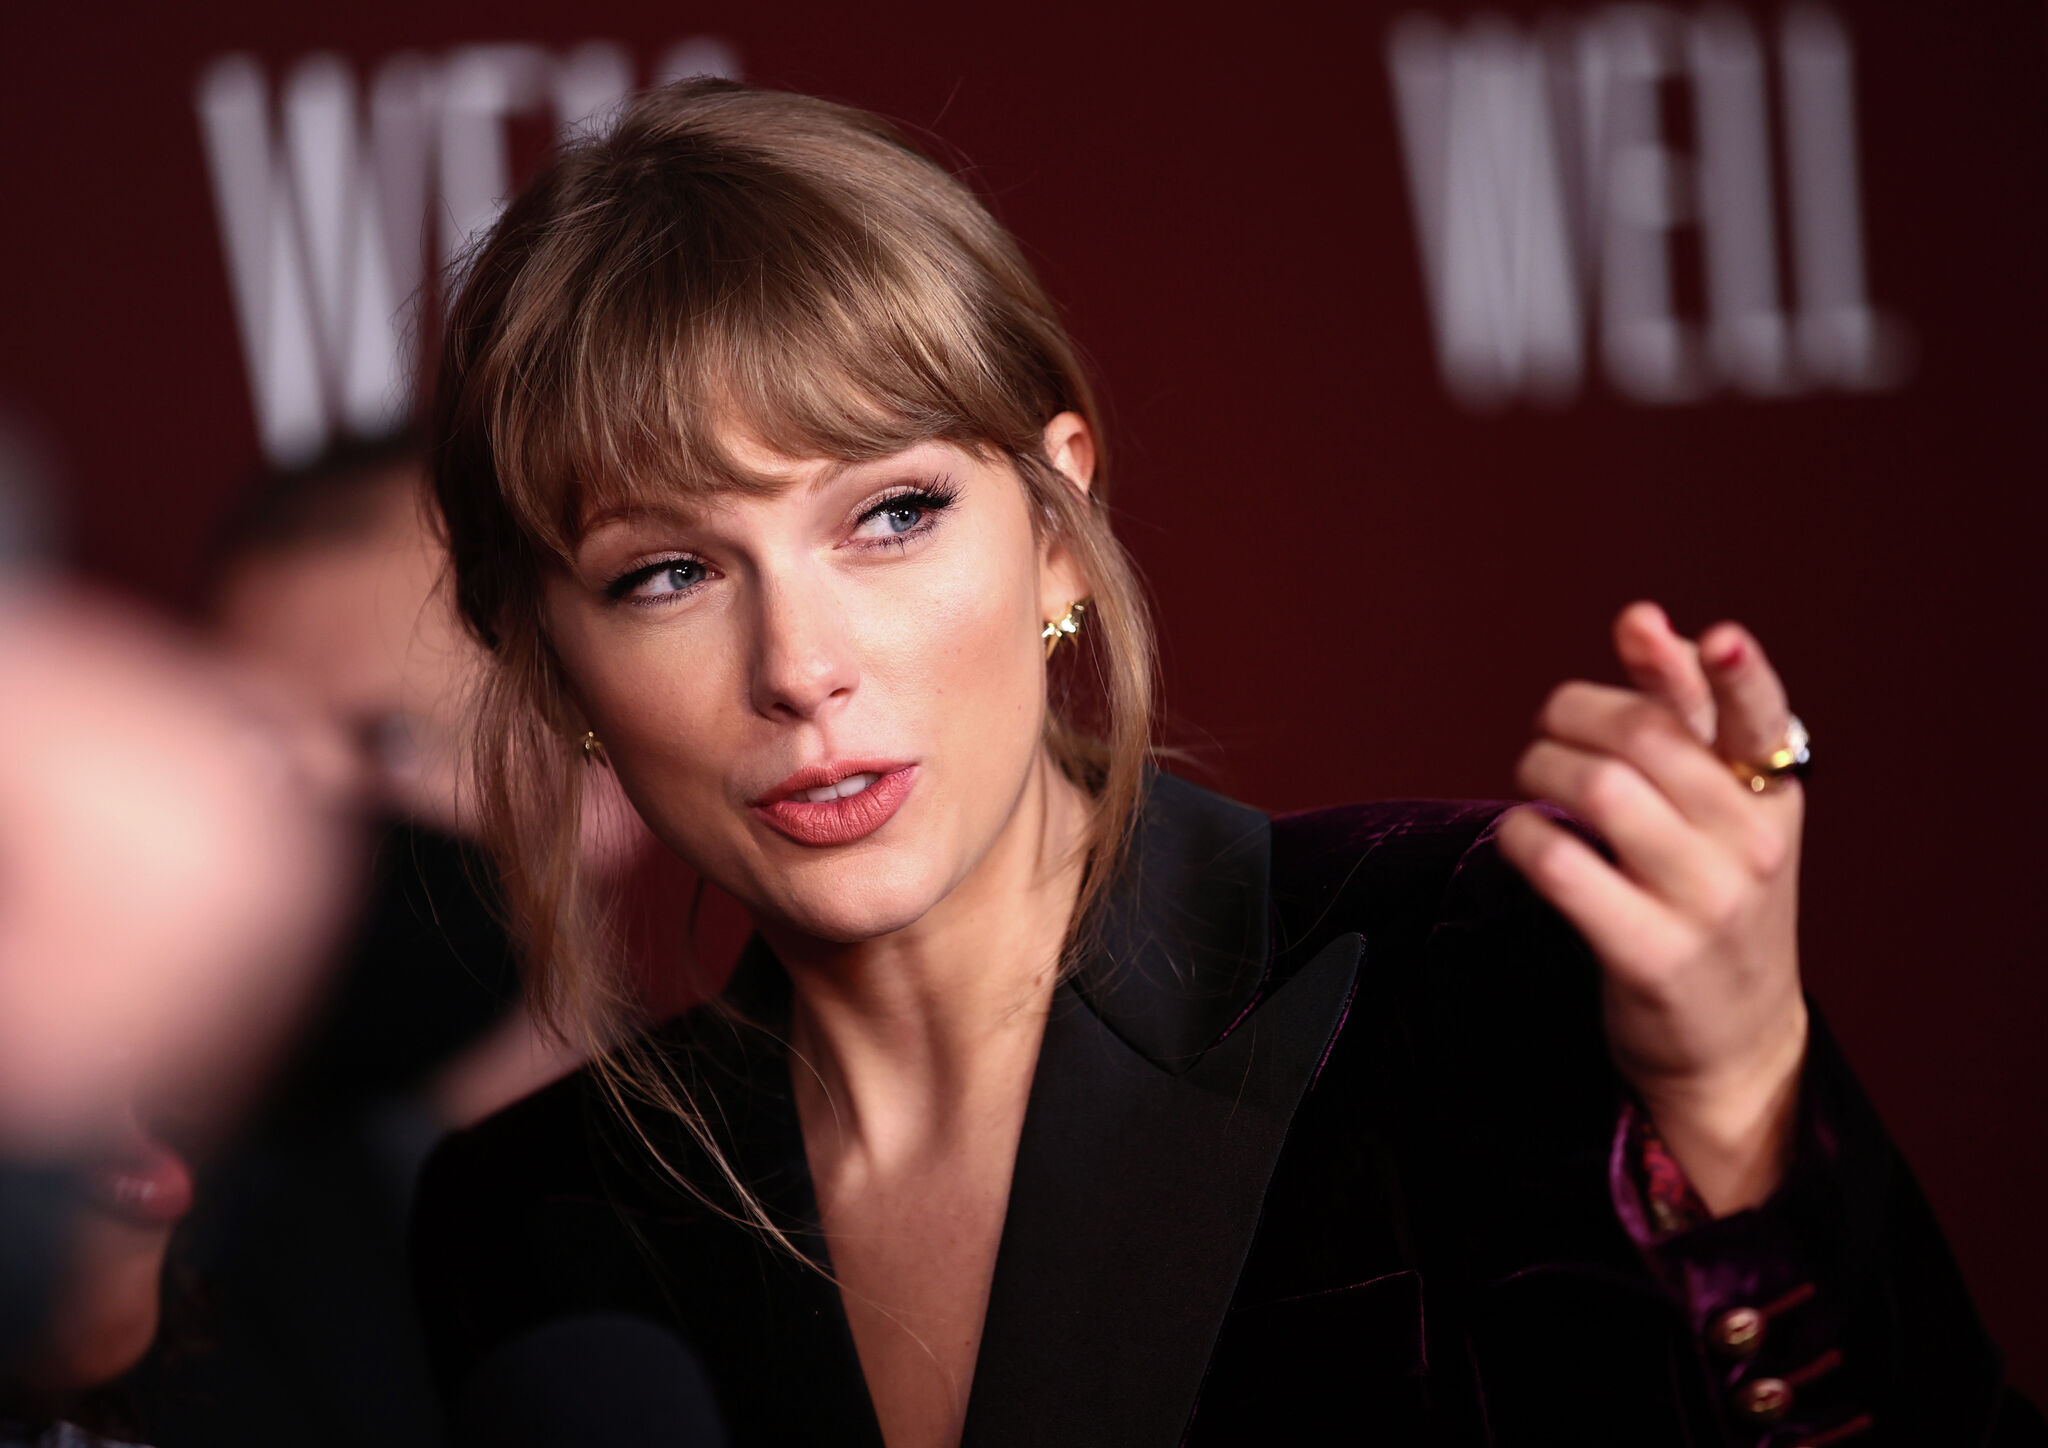 The biggest release of Record Store Day 2022 in San Antonio? Taylor Swift